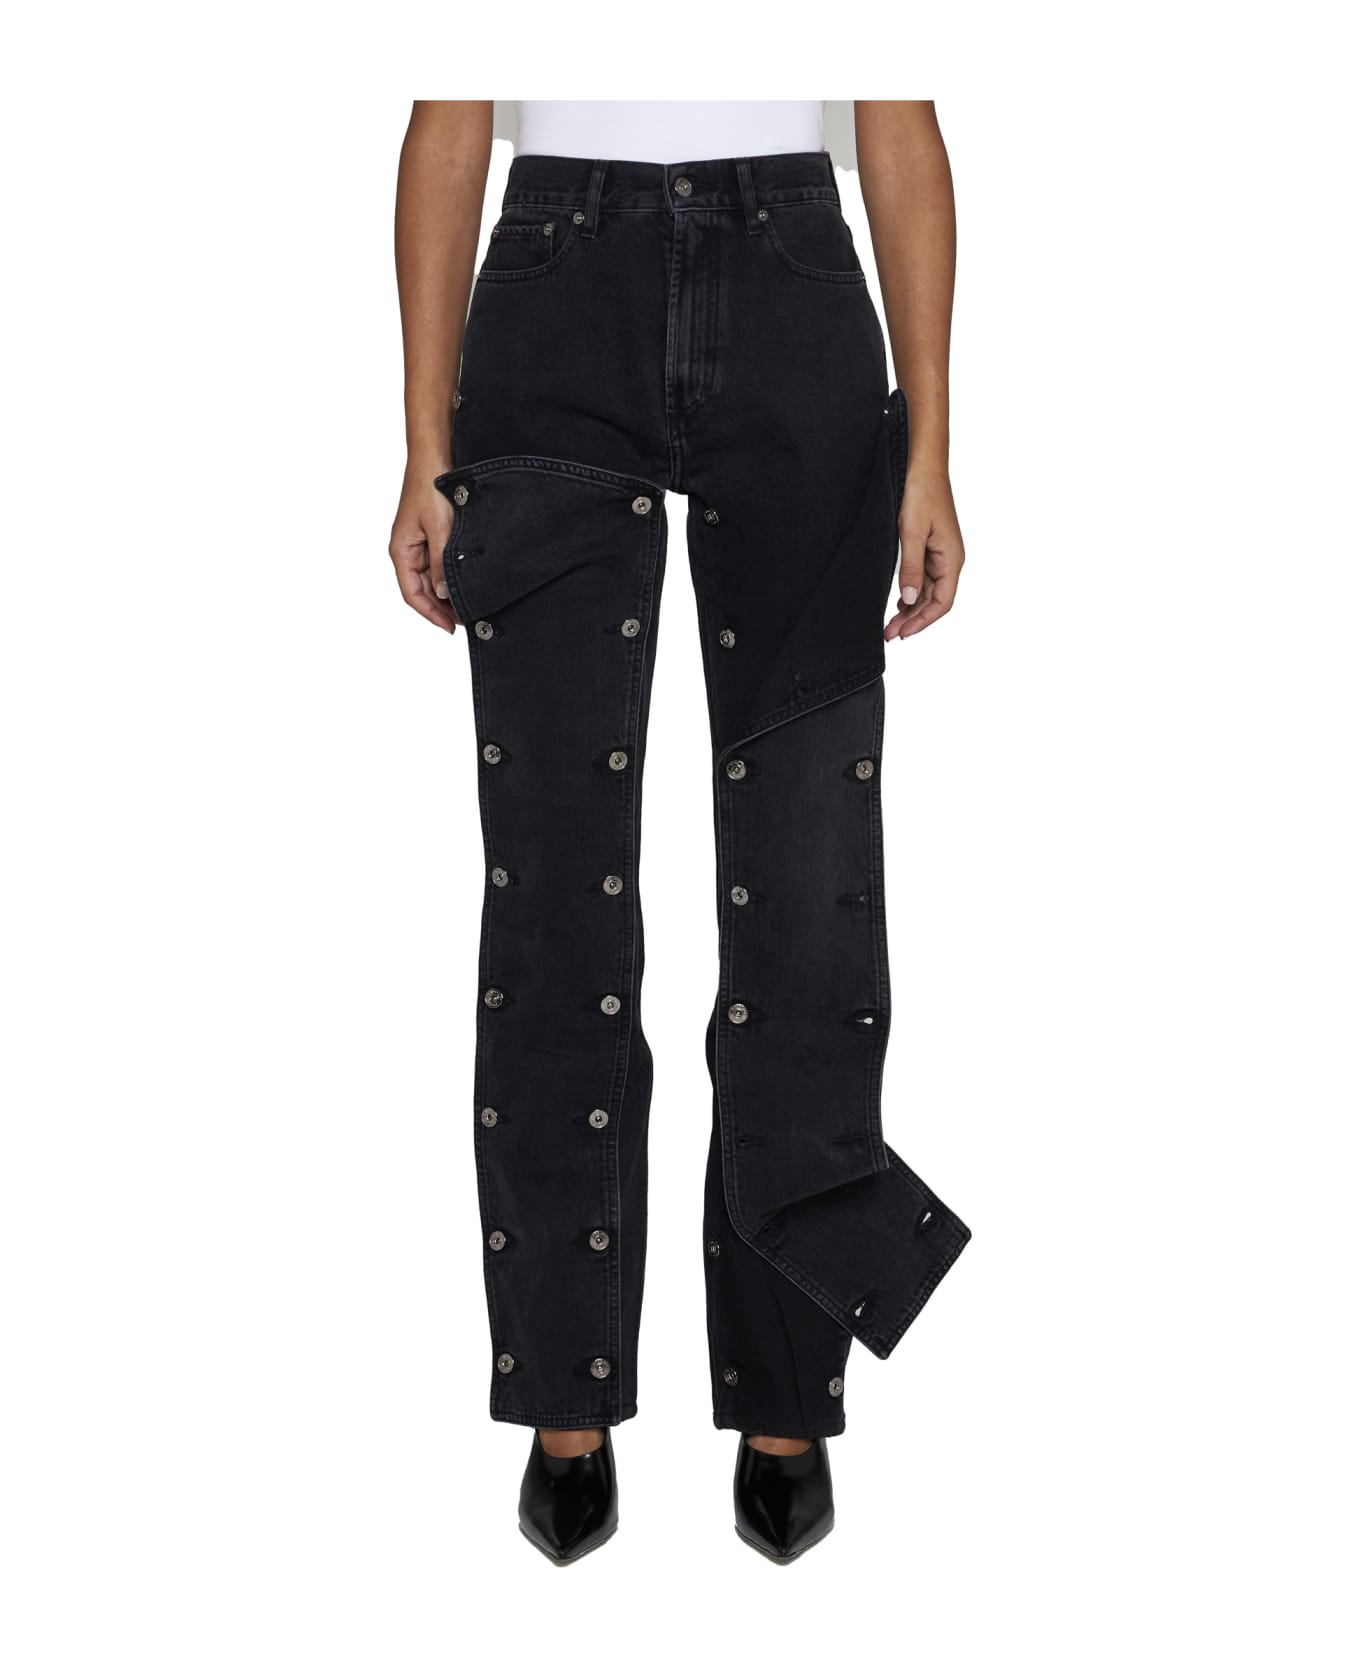 Y/Project Jeans - Evergreen black